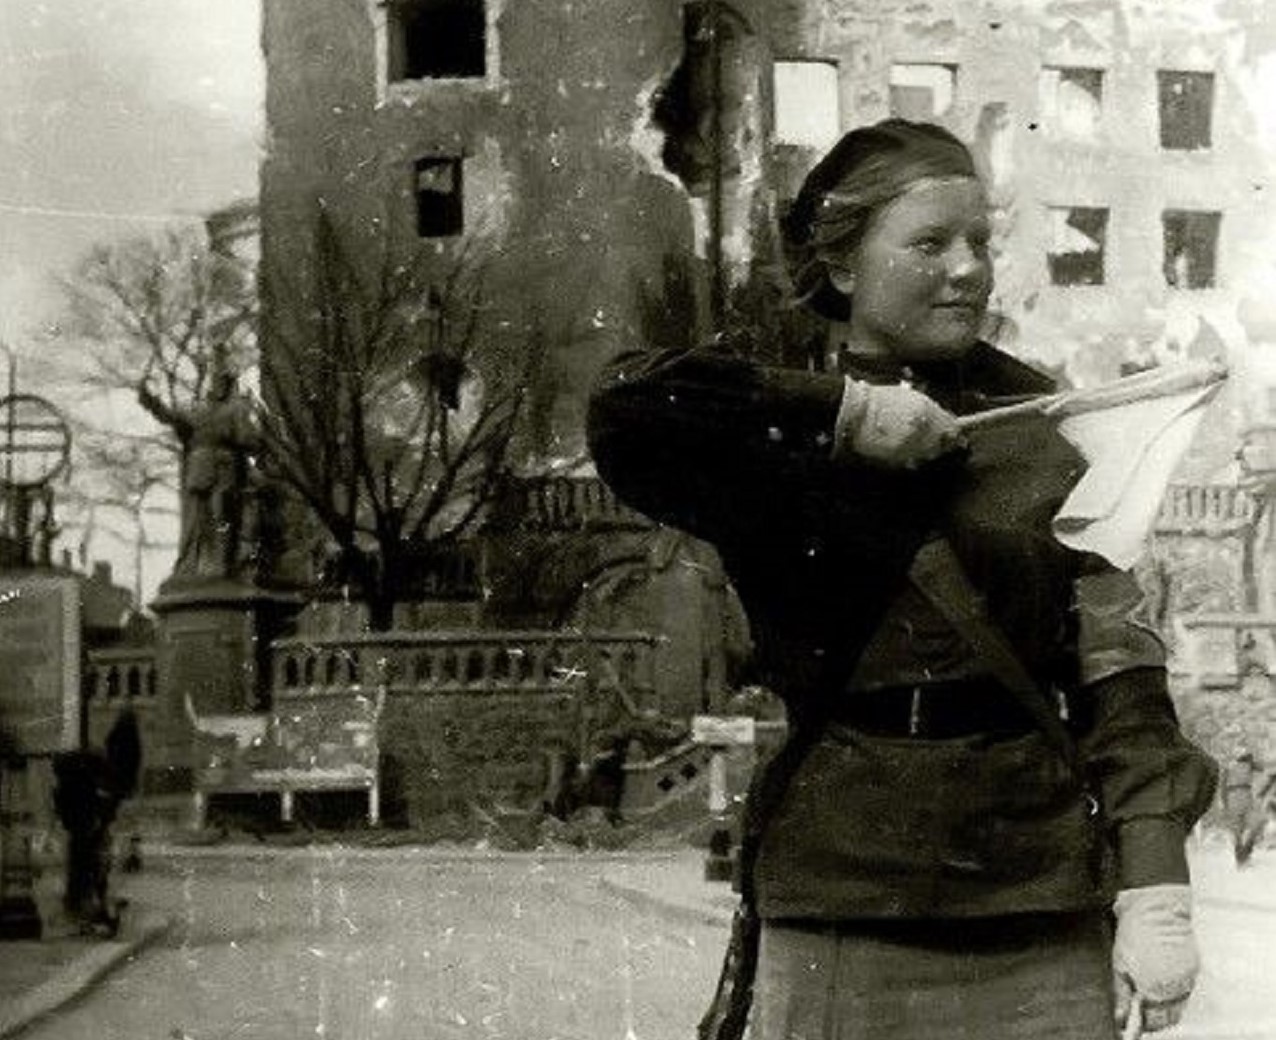 in this black and white photo you can see on the right a young woman, an auxiliary of the Red Army; she puts in her hand a flag.